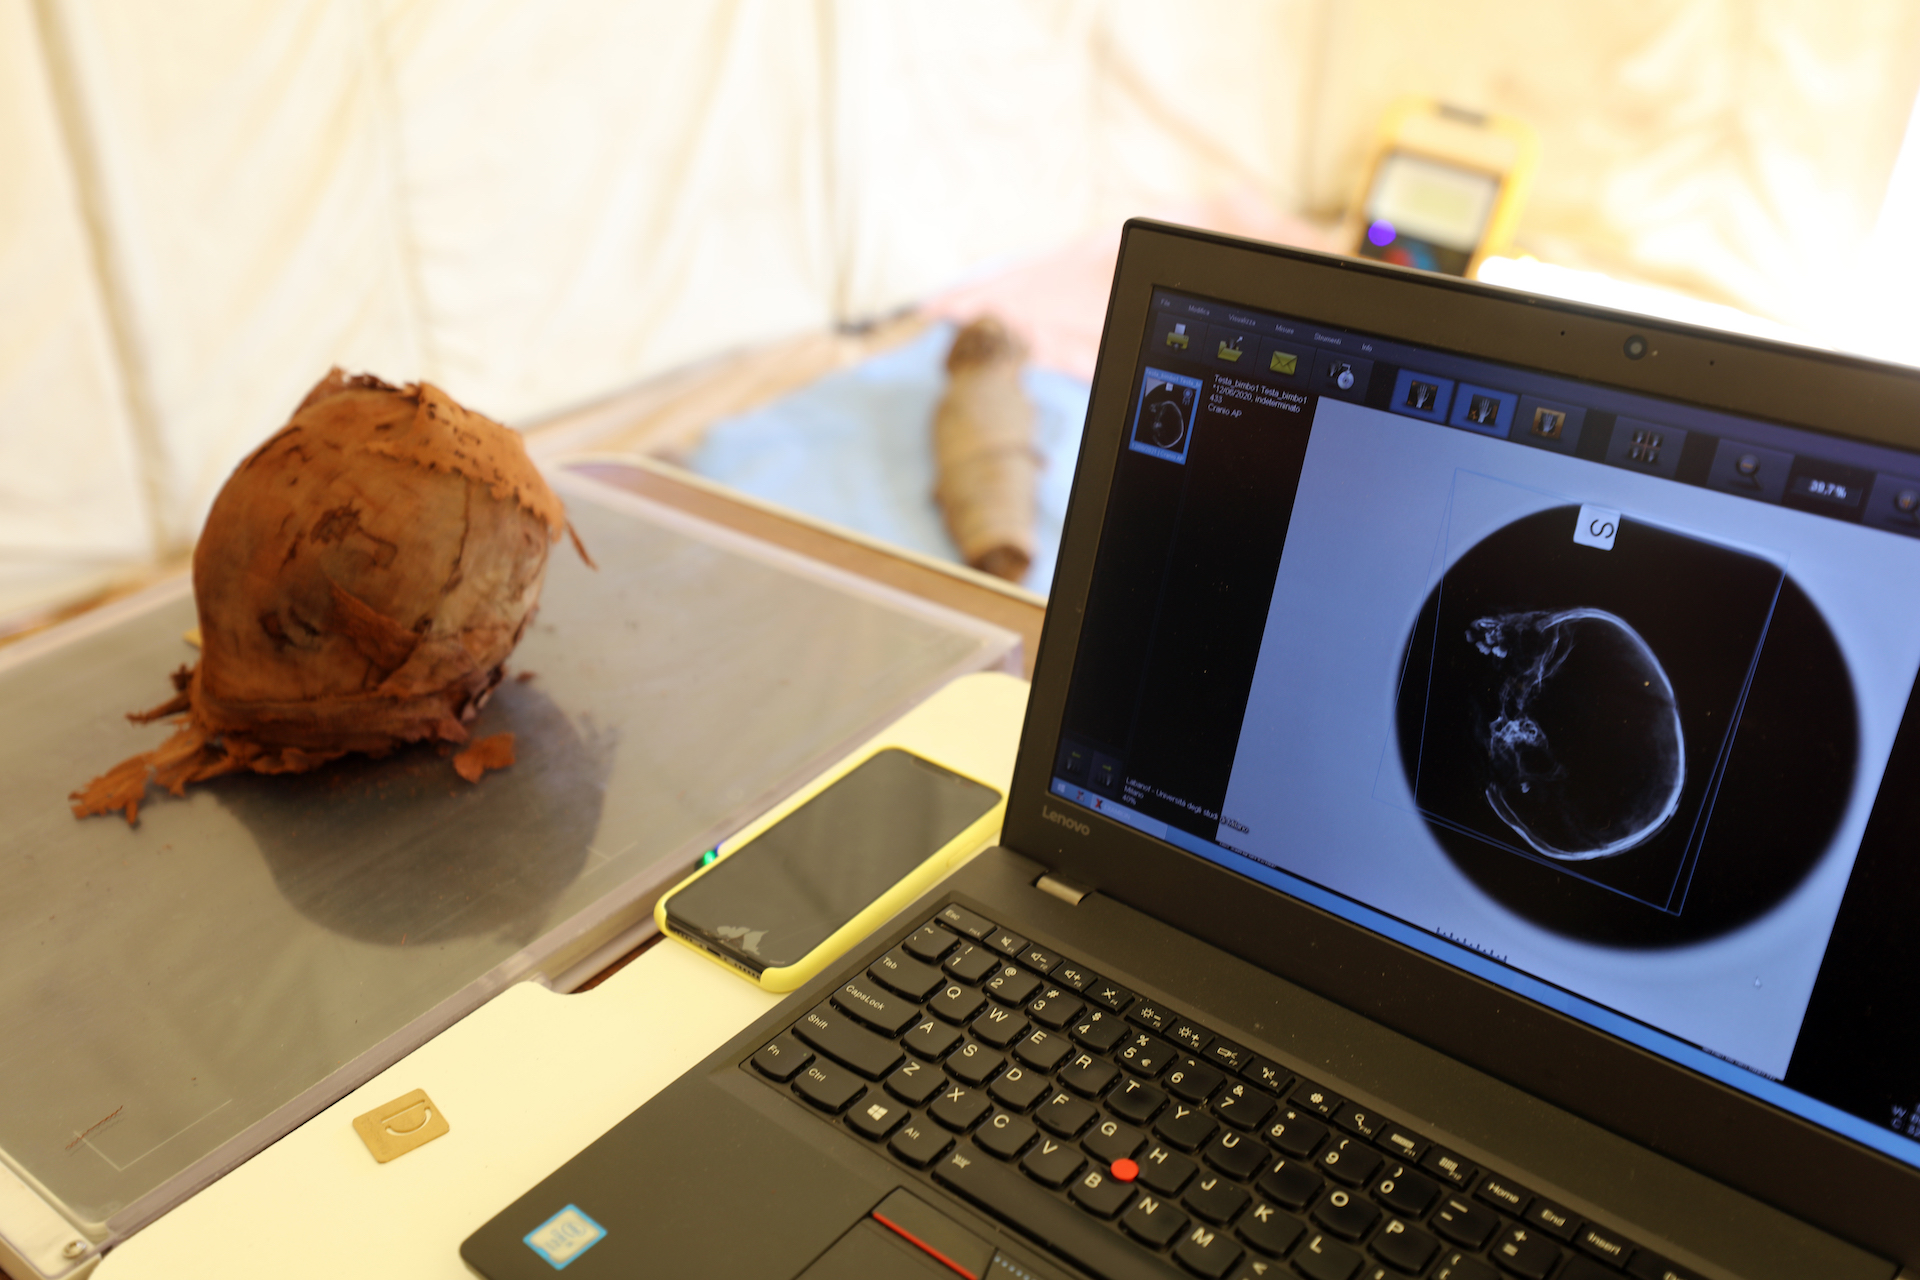 The researchers used a portable x-ray machine at the site to analyze the mummified head of a child.